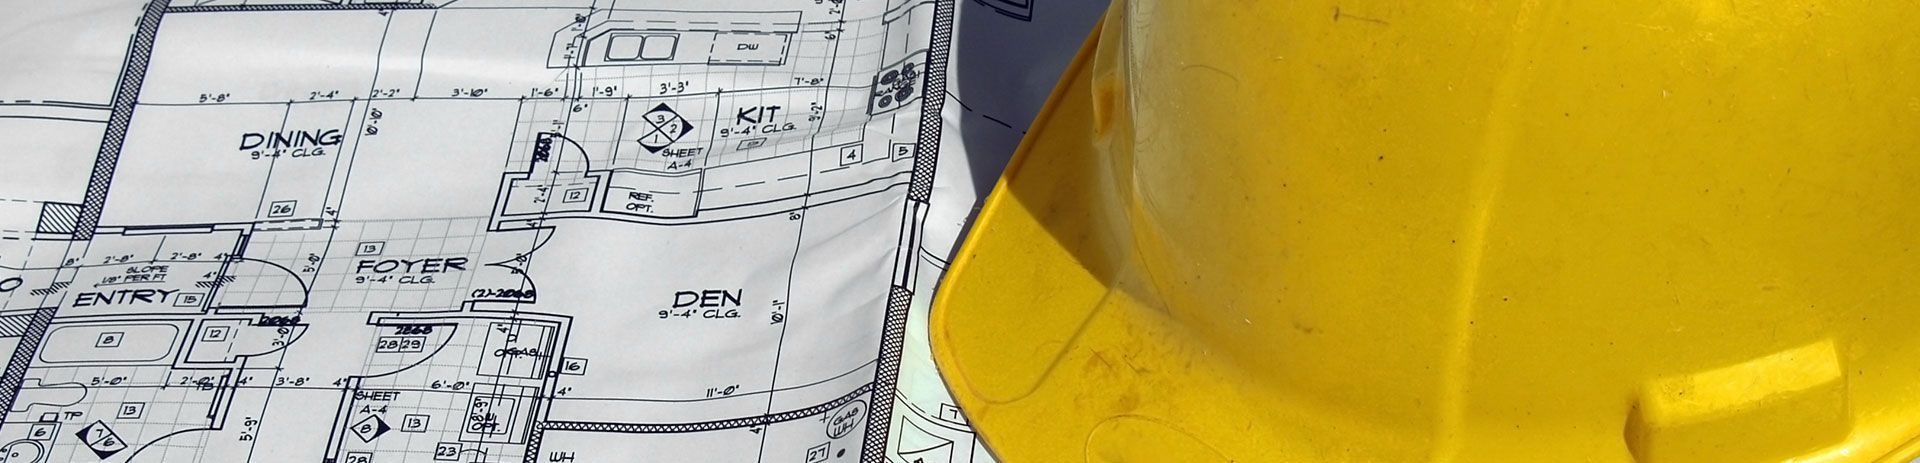 a yellow hard hat is sitting next to a blueprint .